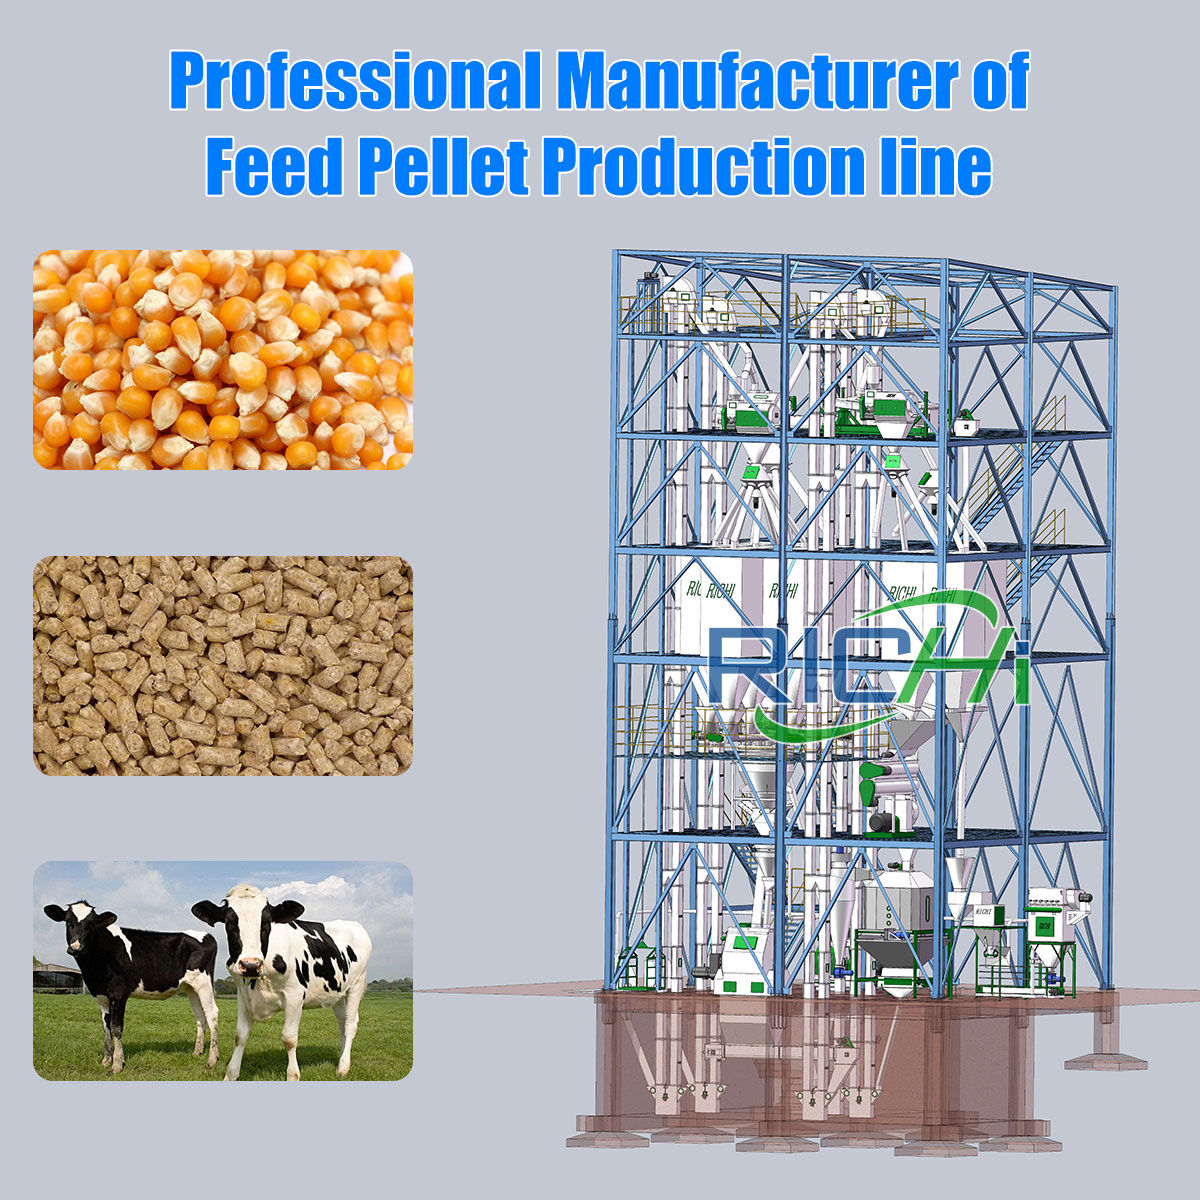 cattle feed manufacturing process in india